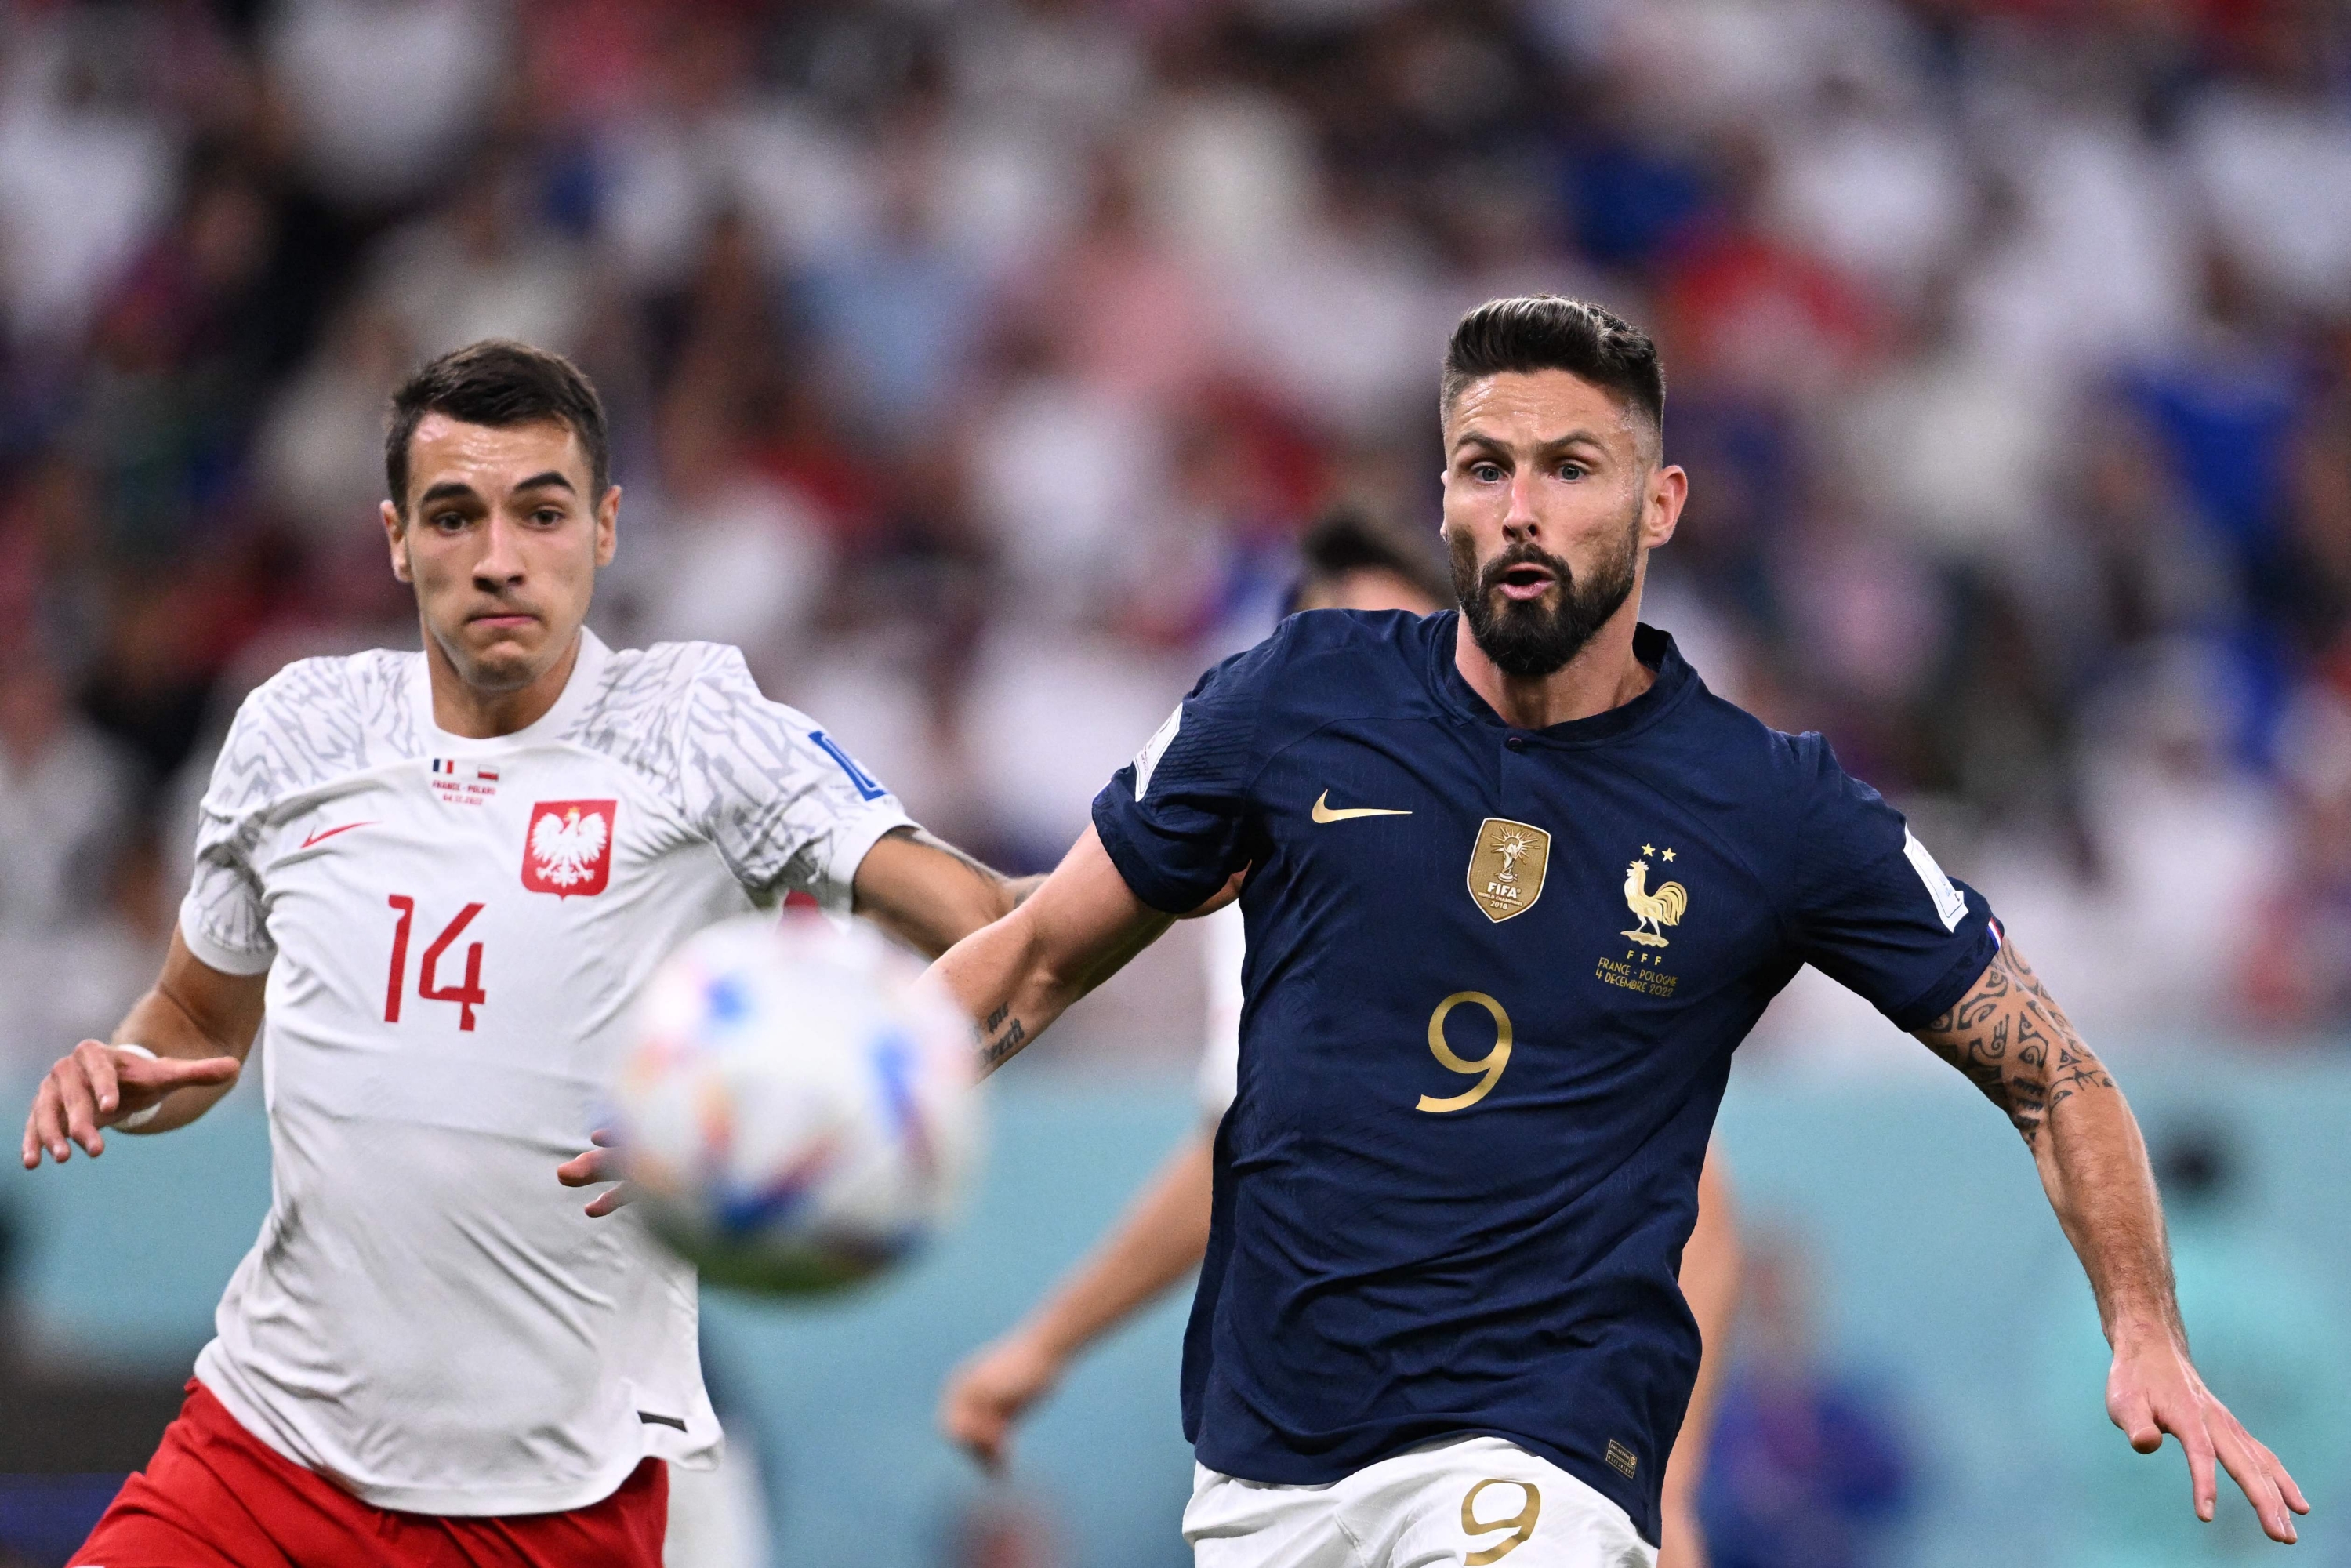 France's forward #09 Olivier Giroud (R) and Poland's defender #14 Jakub Kiwior run after the ball during the Qatar 2022 World Cup round of 16 football match between France and Poland at the Al-Thumama Stadium in Doha on December 4, 2022. (Photo by Kirill KUDRYAVTSEV / AFP)